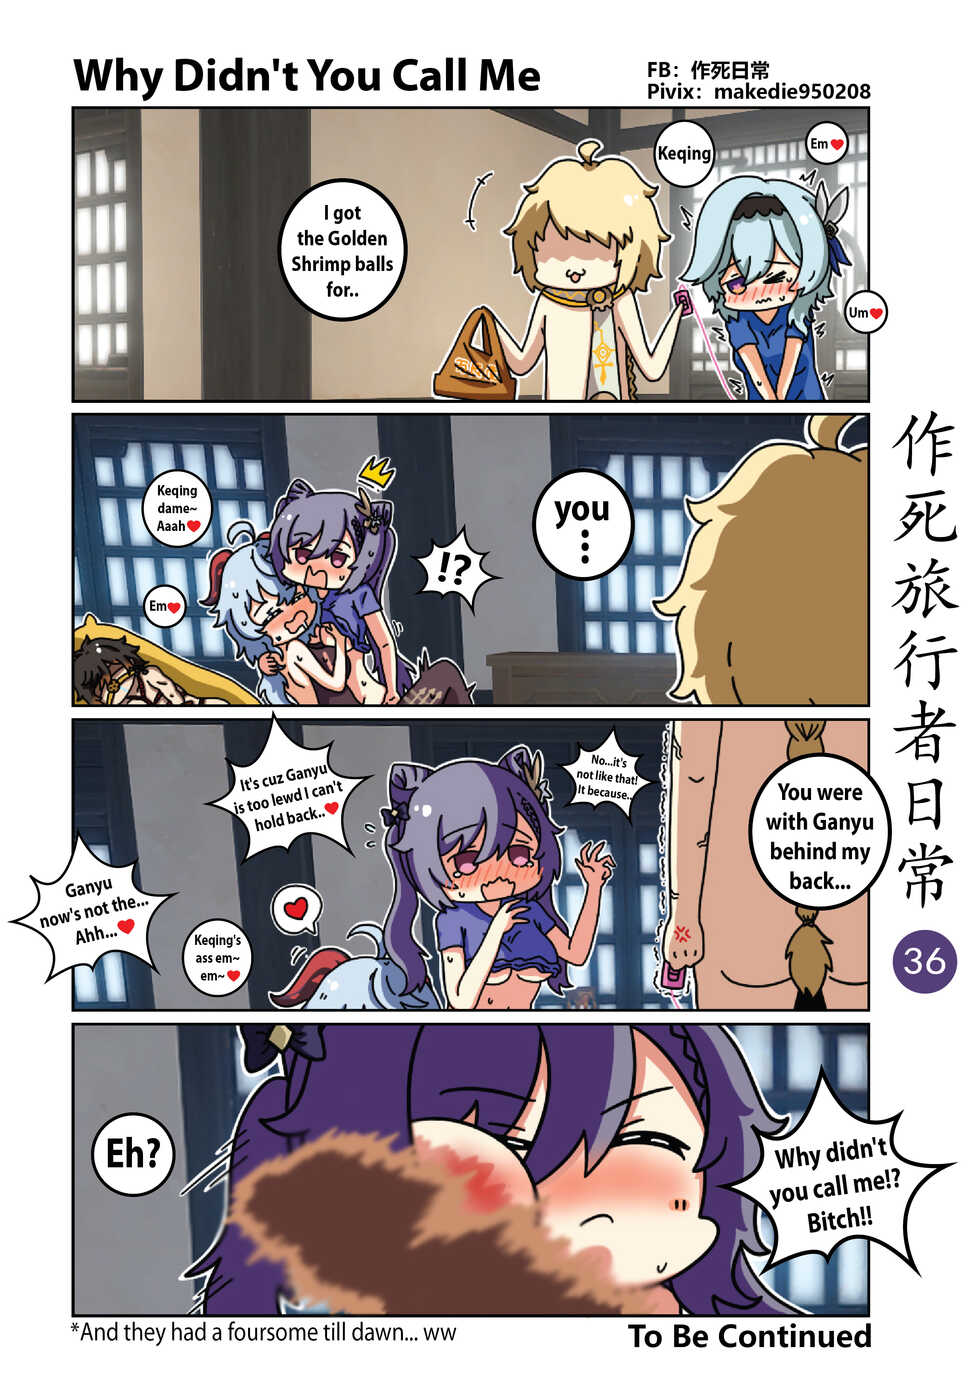 Makedie traveler daily life - Page 36